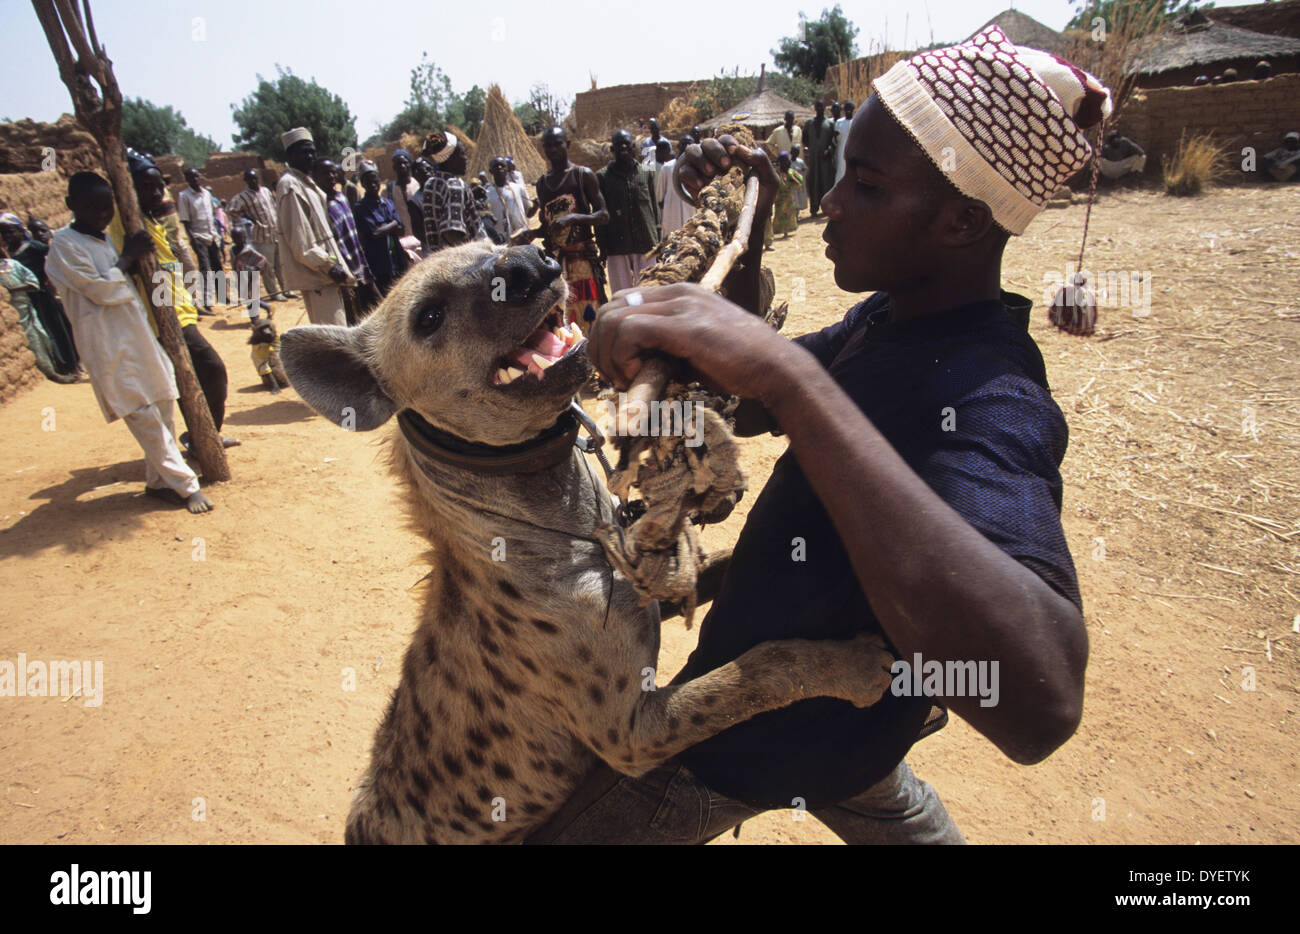 Hyena pet is part of animist circus troop. Animists believe that the owner recieves power from the animal. Kano State, Nigeria Stock Photo